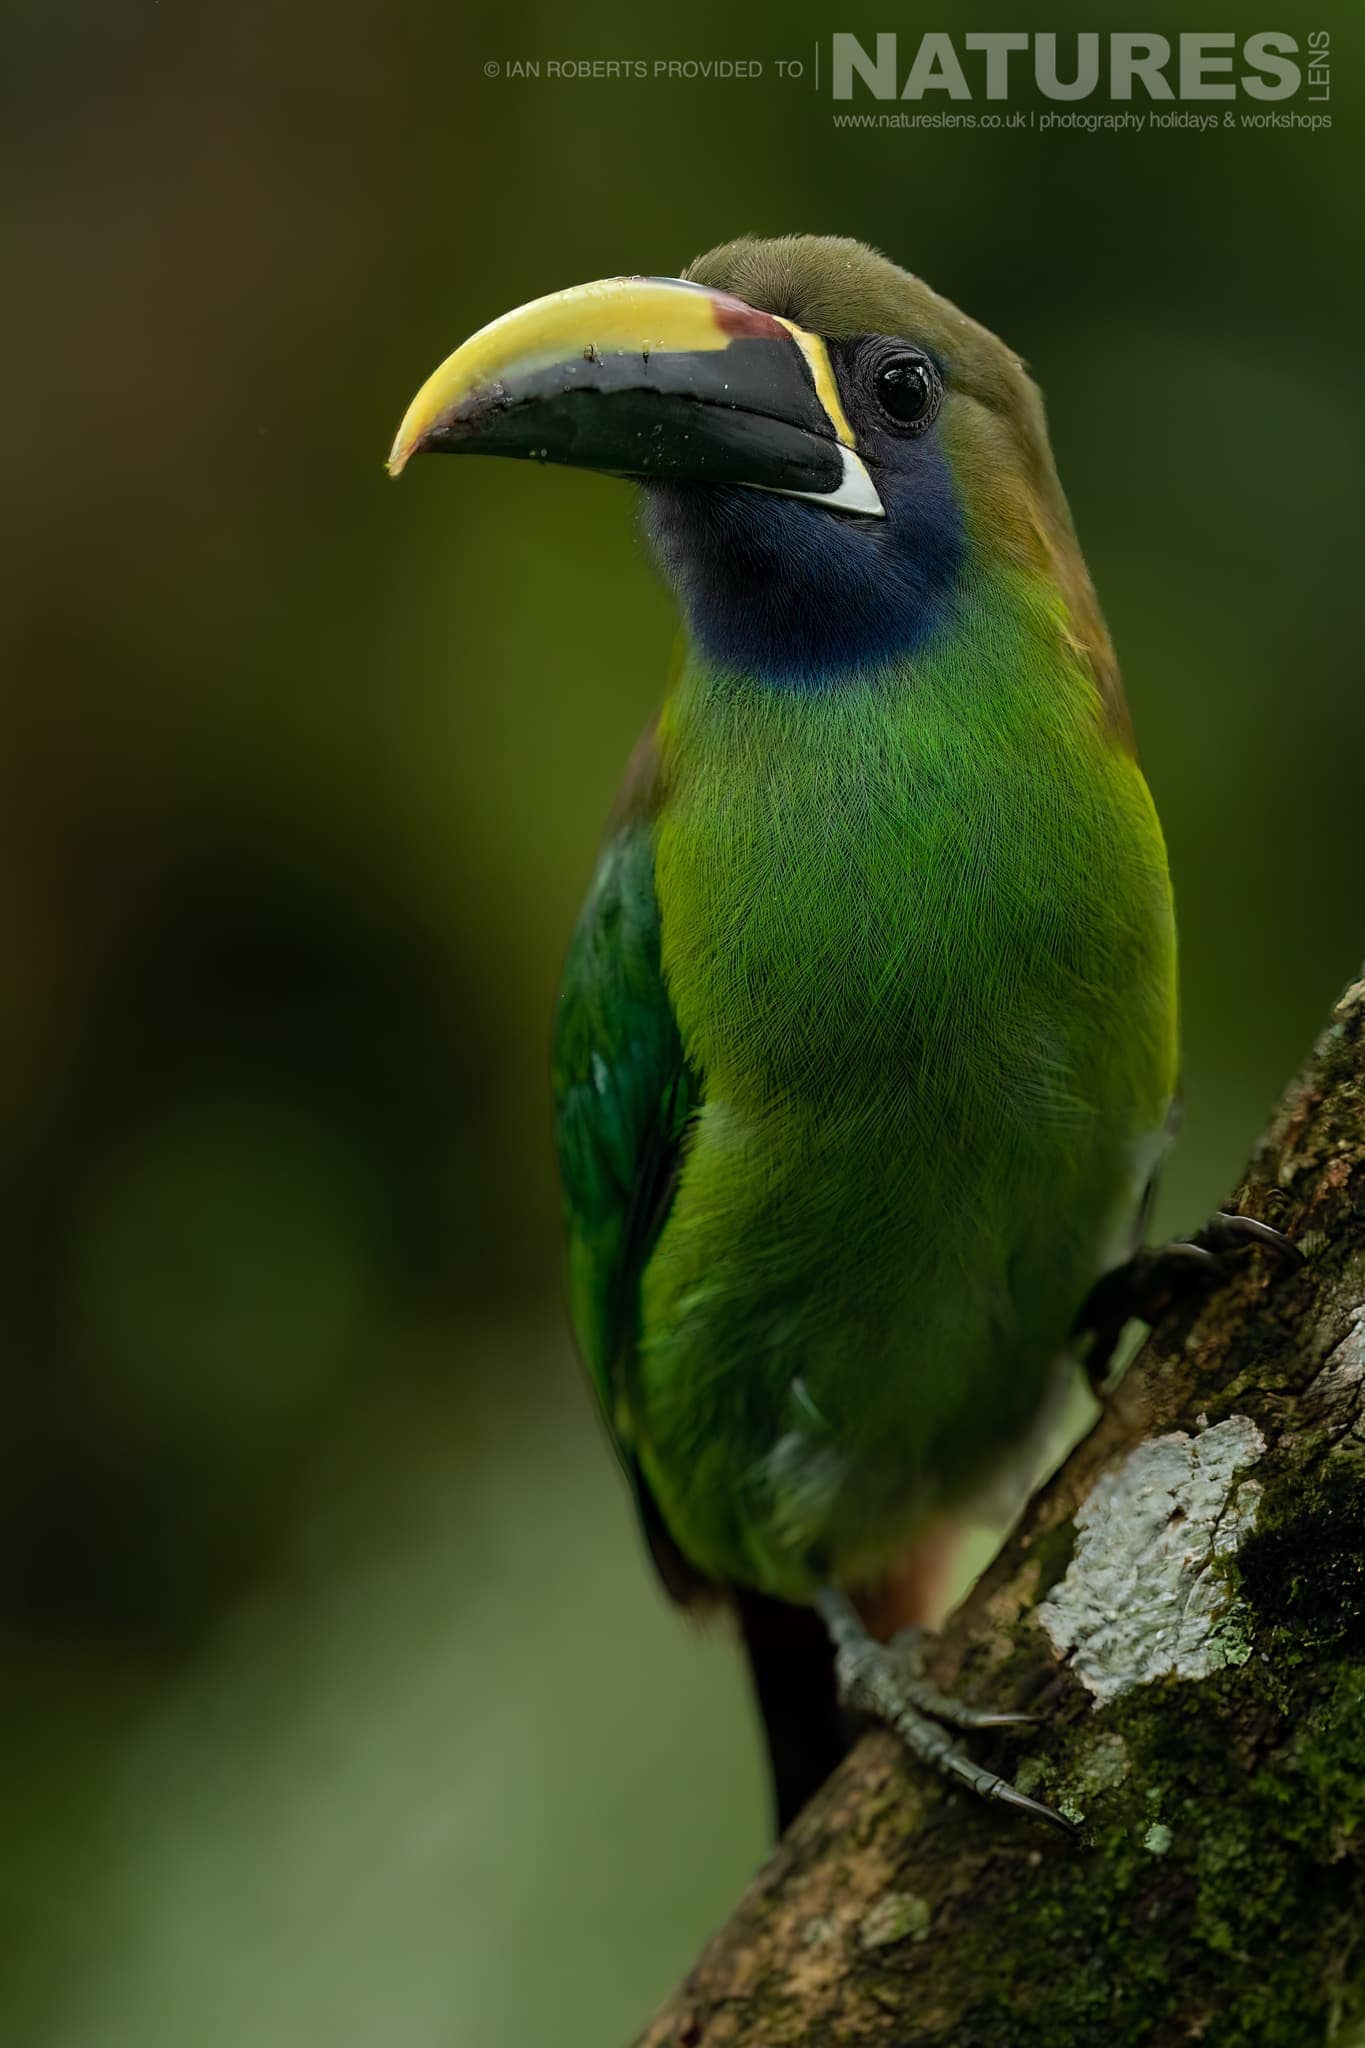 An Emerald Toucanet One Of The Toucans In Costa Rica